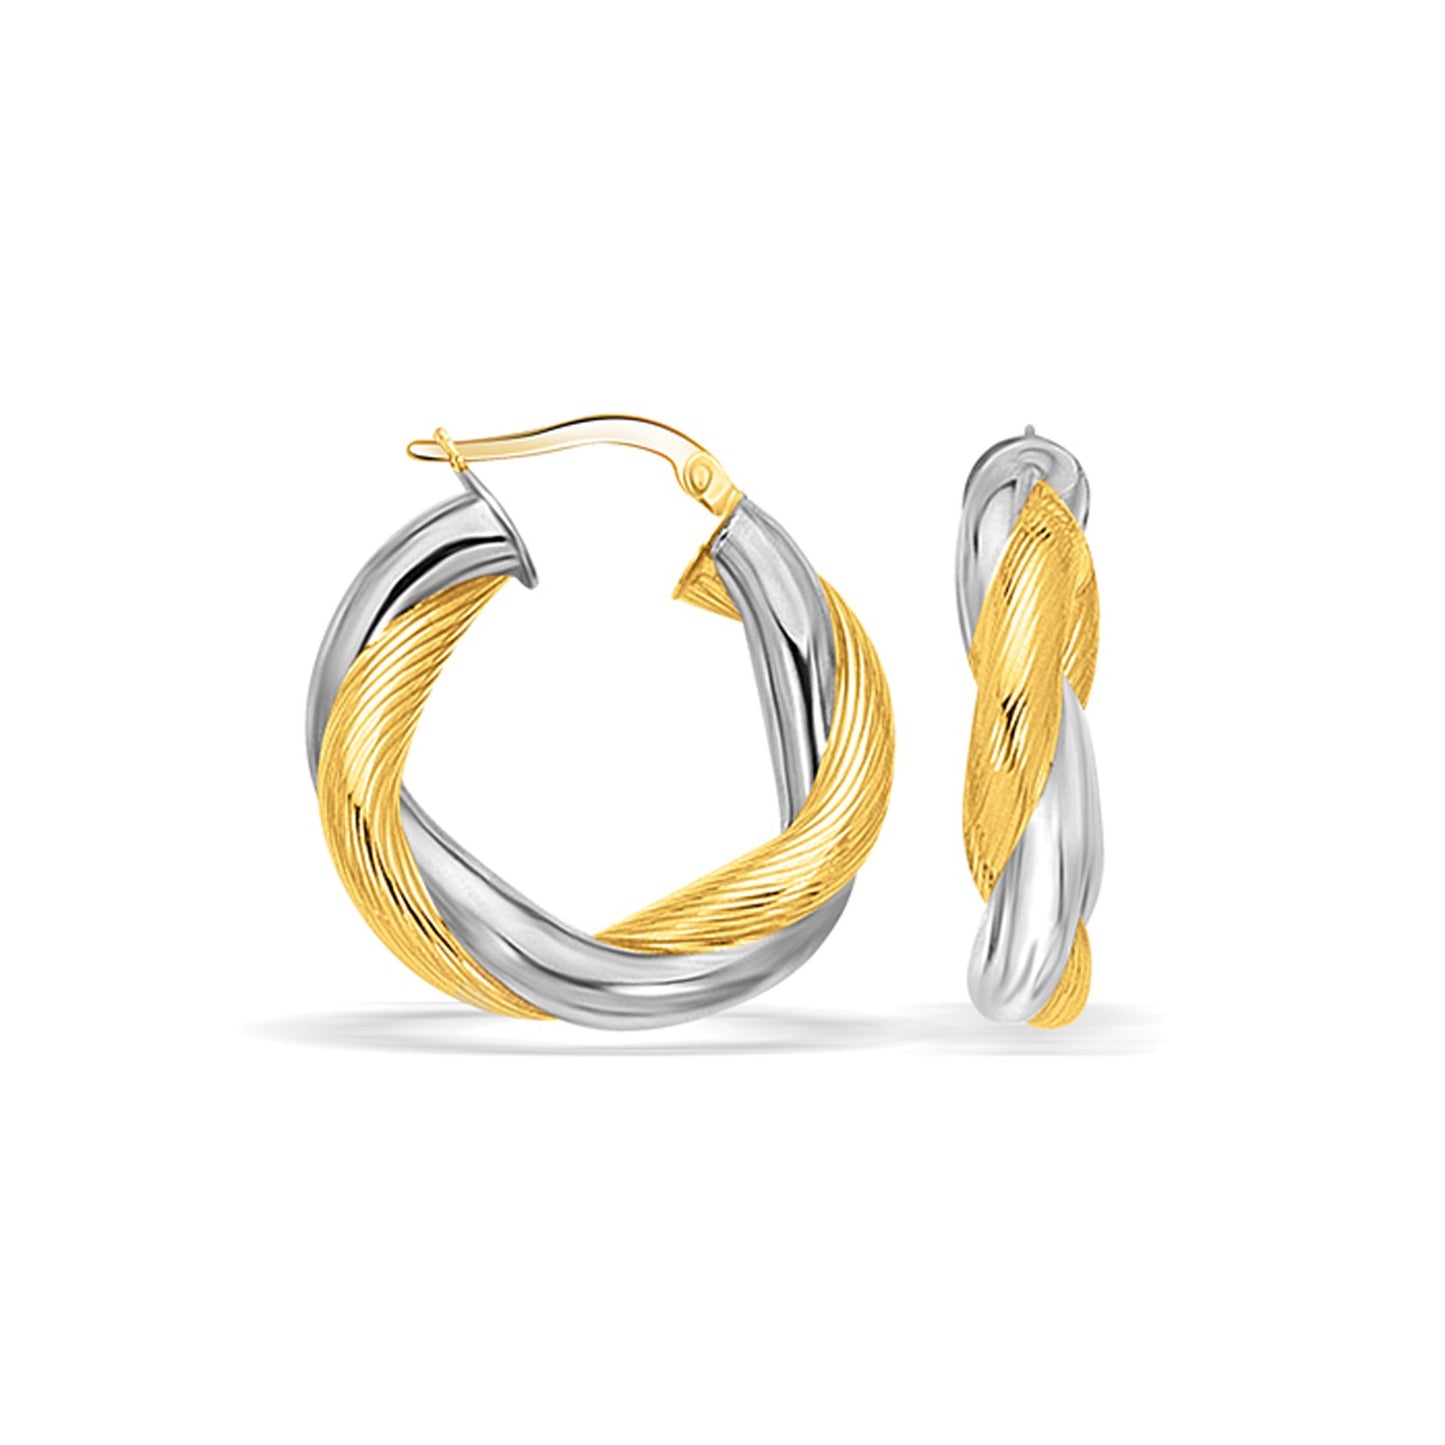 14K Twisted White and Yellow Gold Hoop Earrings (1 inch Diameter)